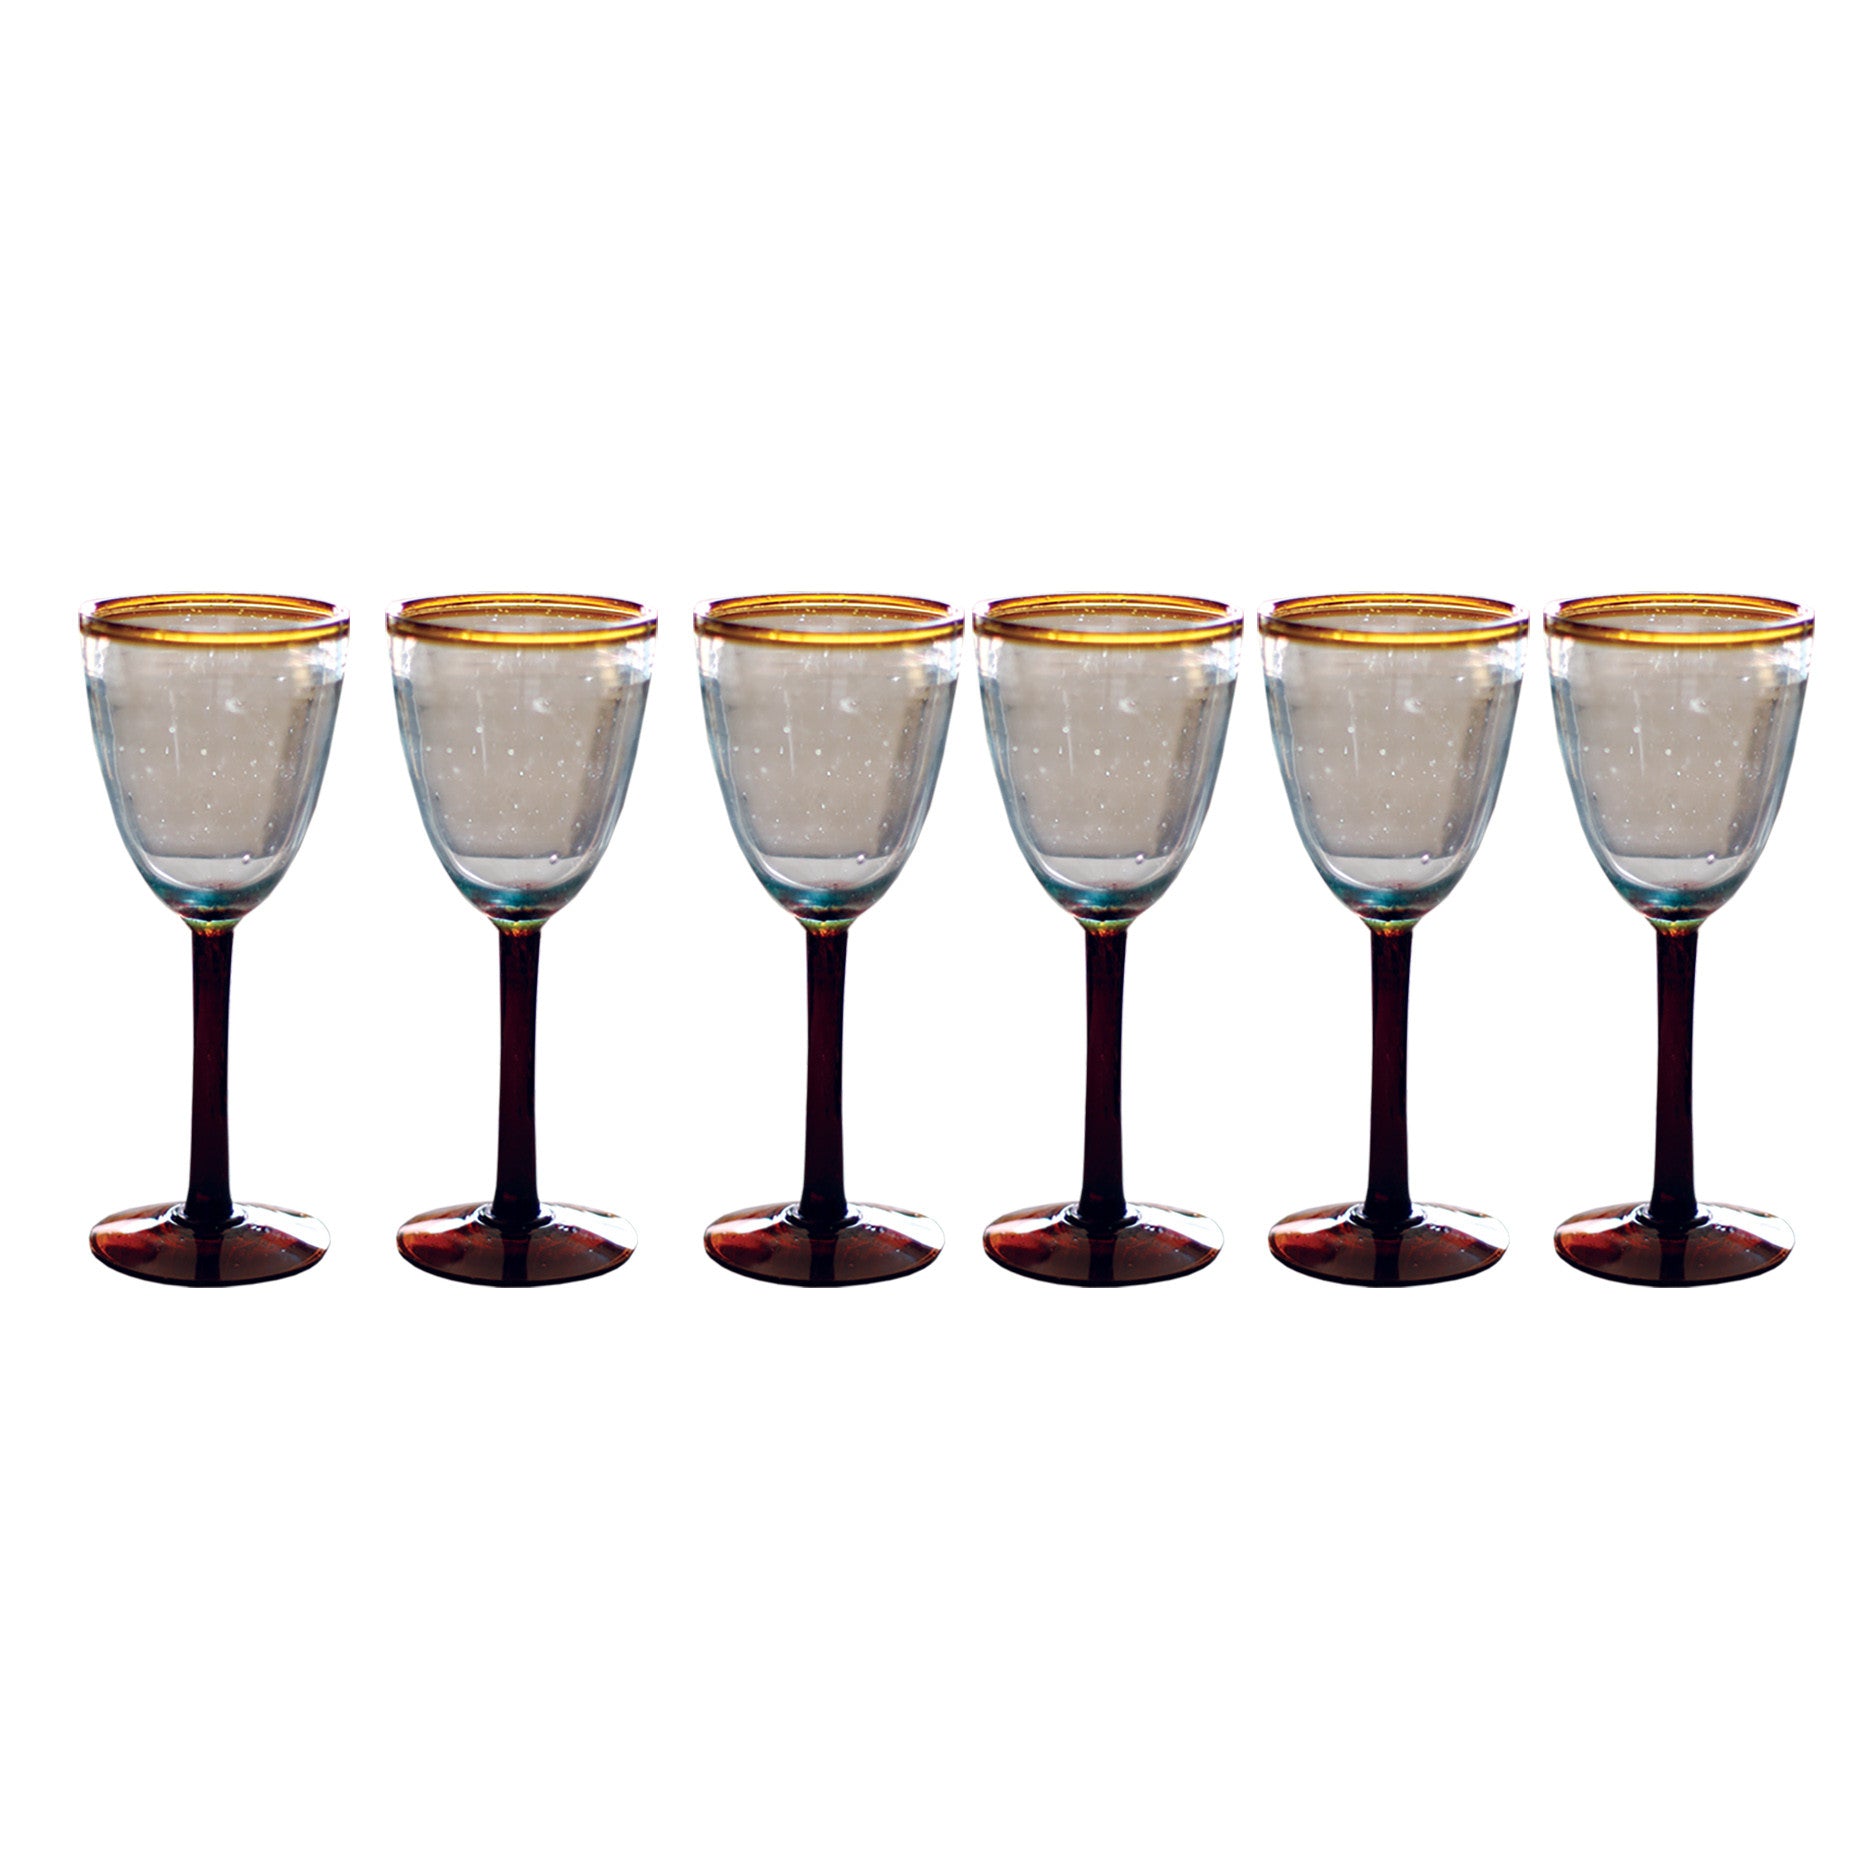 Amber Wine Glasses Set Of 6 - Colored Wine Glasses with Stem and Flat  Bottom,Modern Colorful Wine Gl…See more Amber Wine Glasses Set Of 6 -  Colored